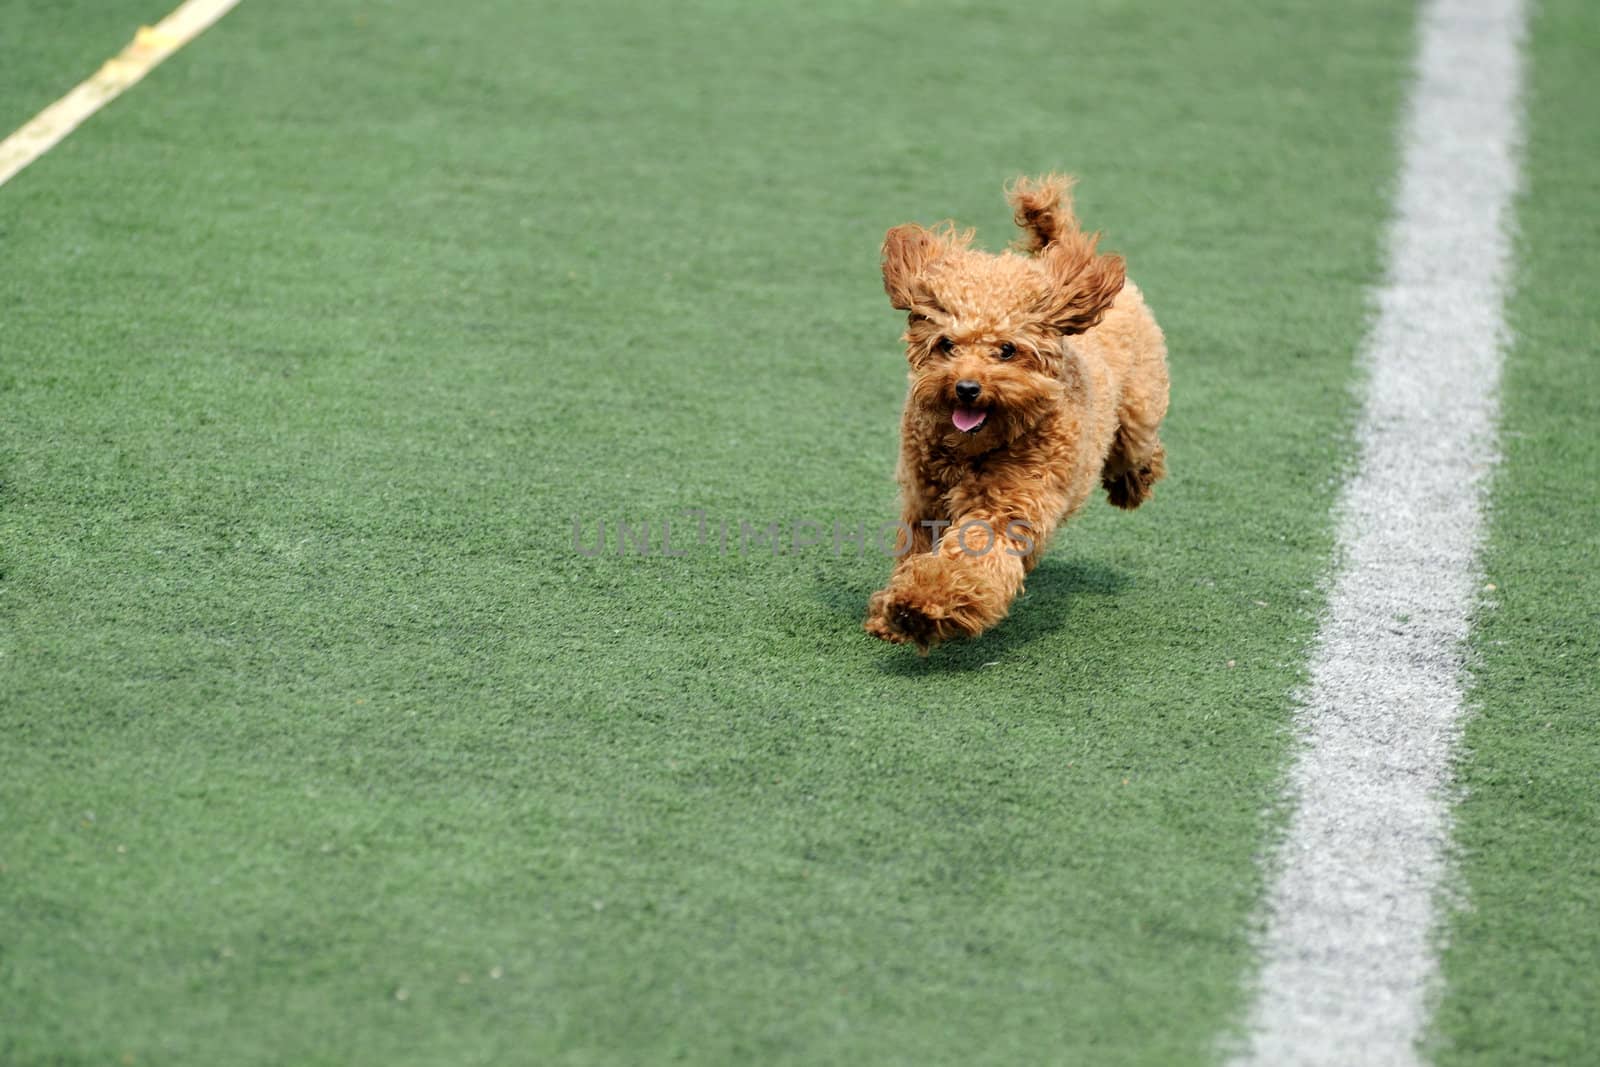 Lovely little toy poodle dog running on the playground